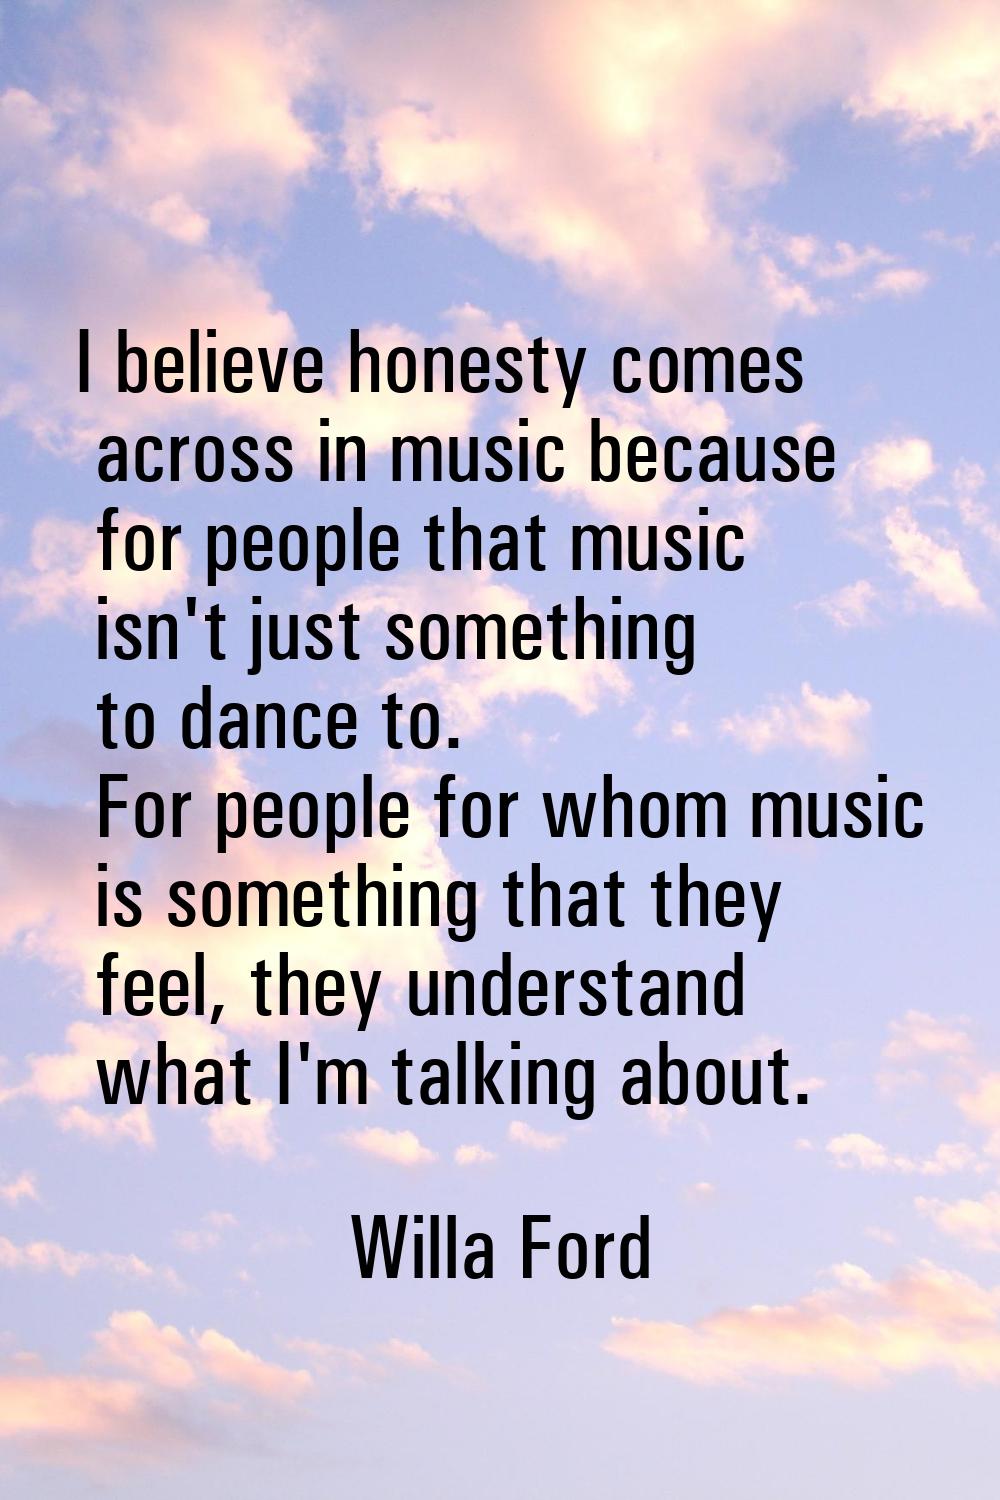 I believe honesty comes across in music because for people that music isn't just something to dance